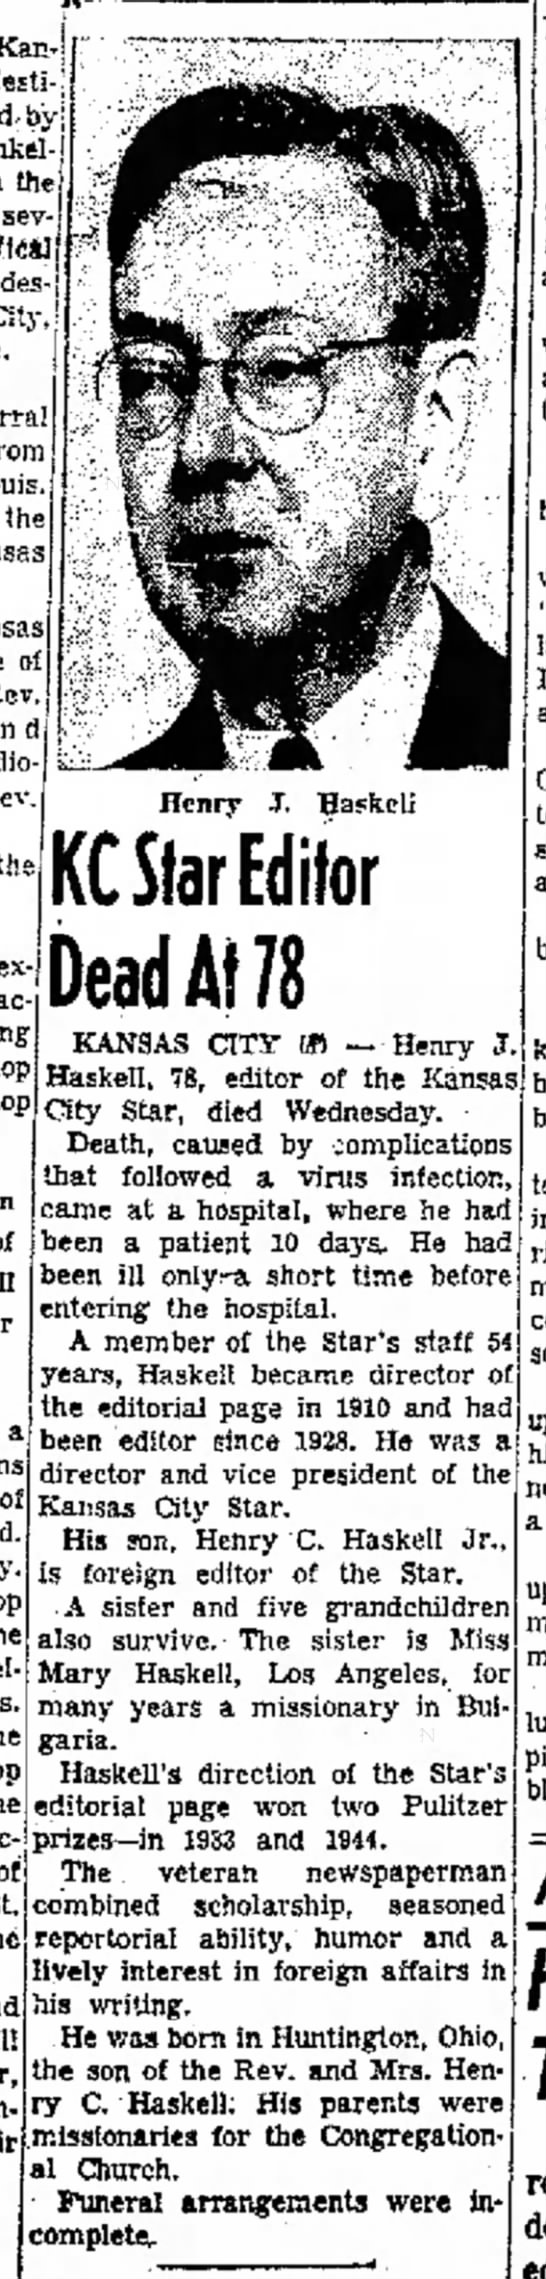 Henry J. Haskell died 1952. - 